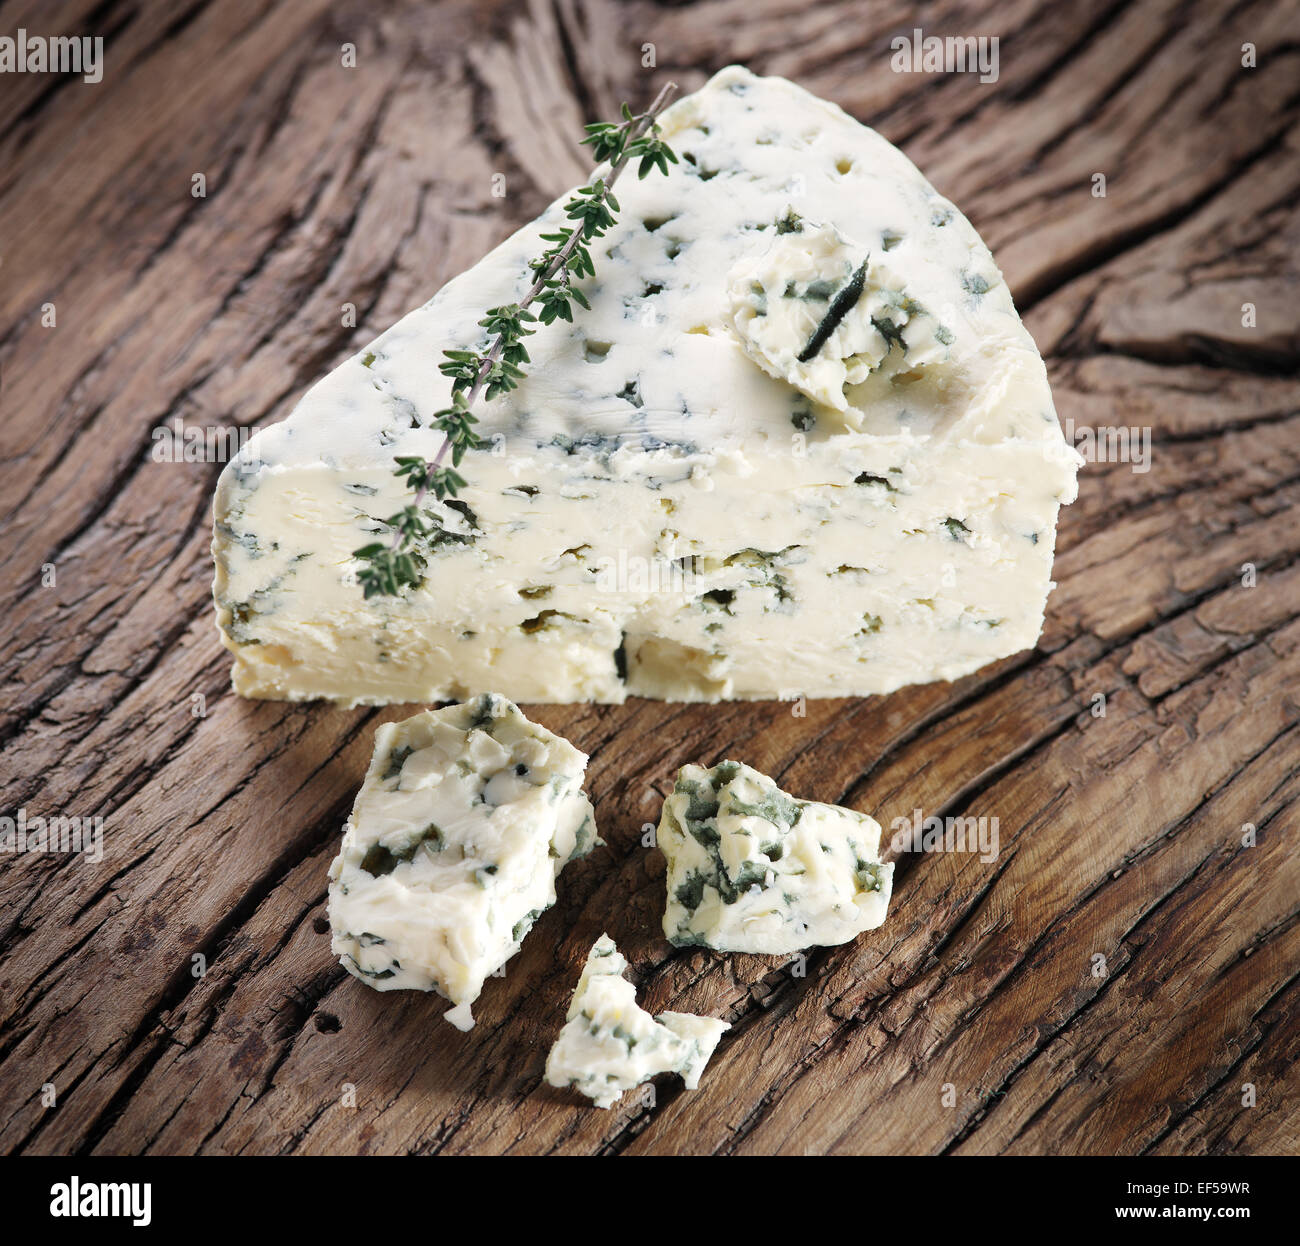 Slices of Danish Blue cheese on an old wooden table. Stock Photo